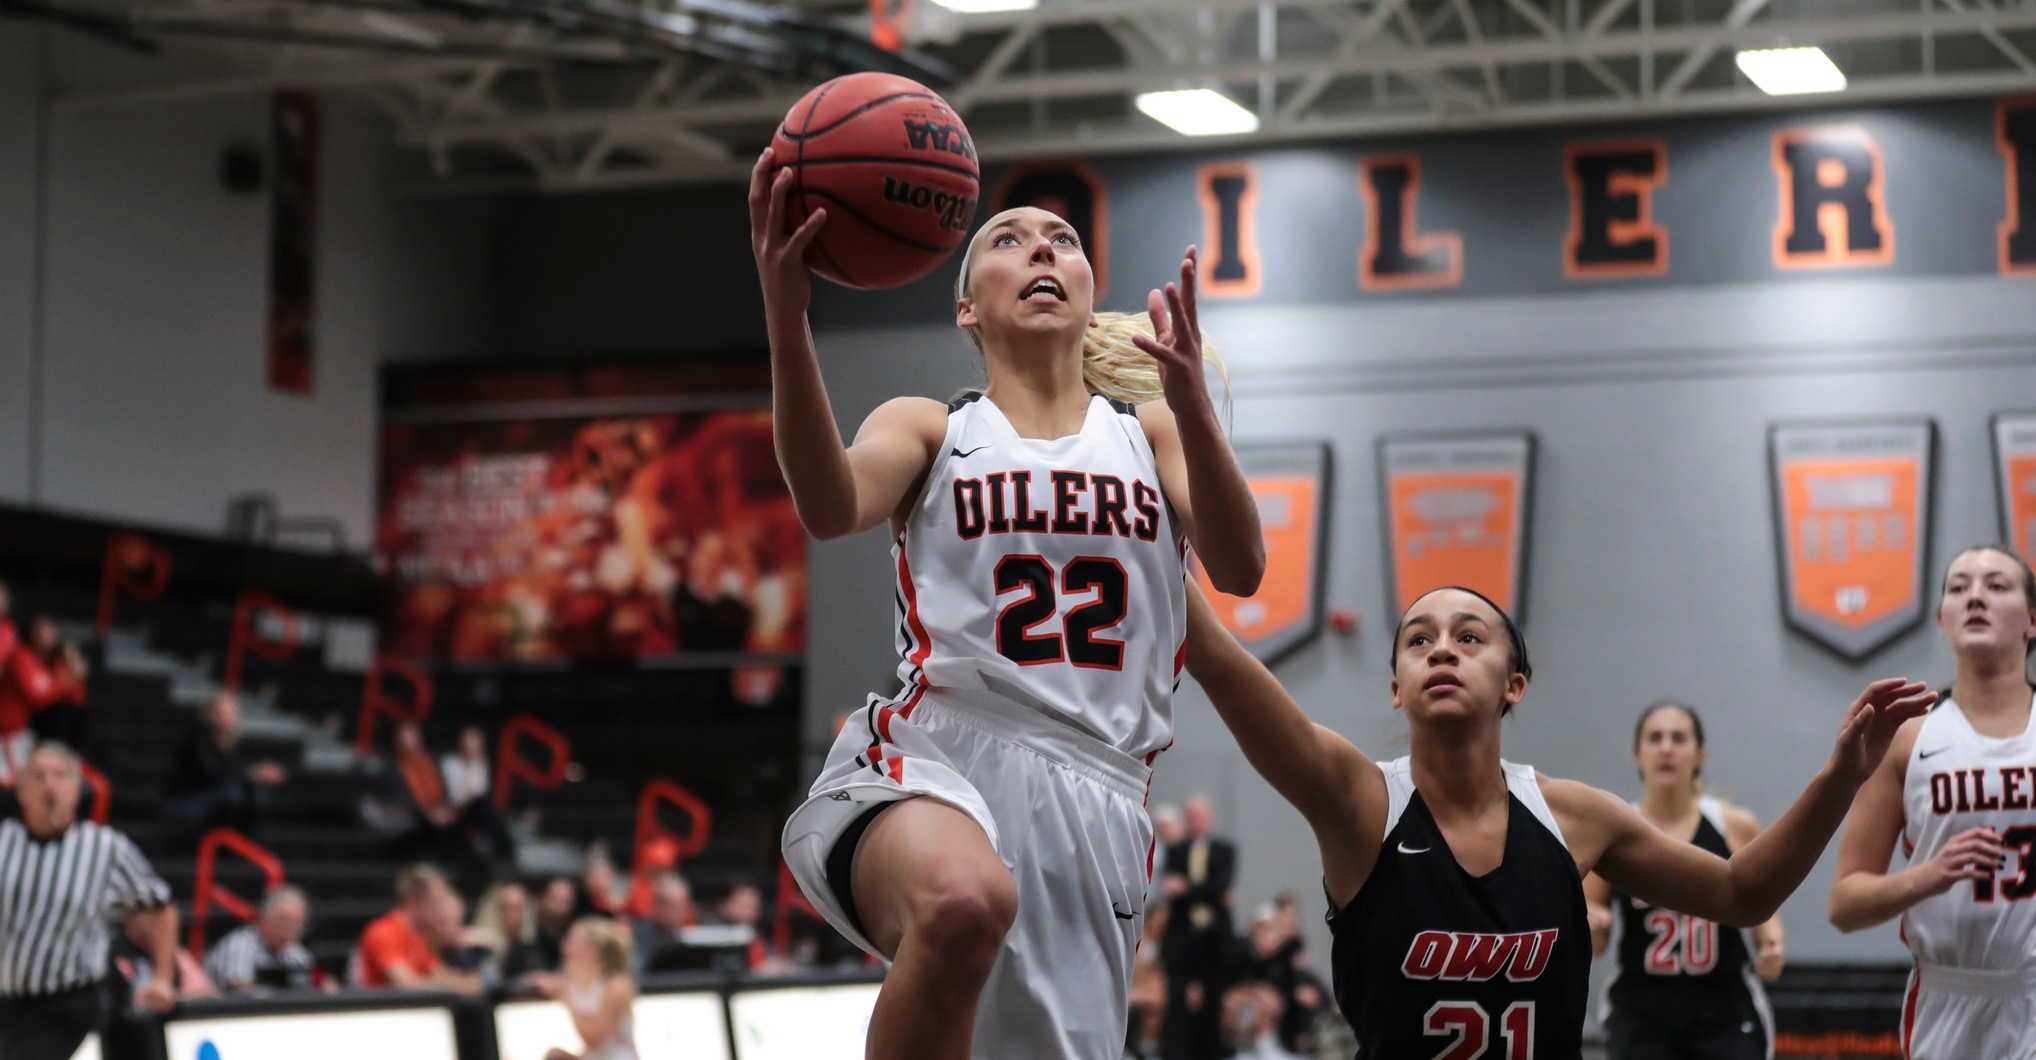 Oilers Open Season With 20-Point Win at Wayne State